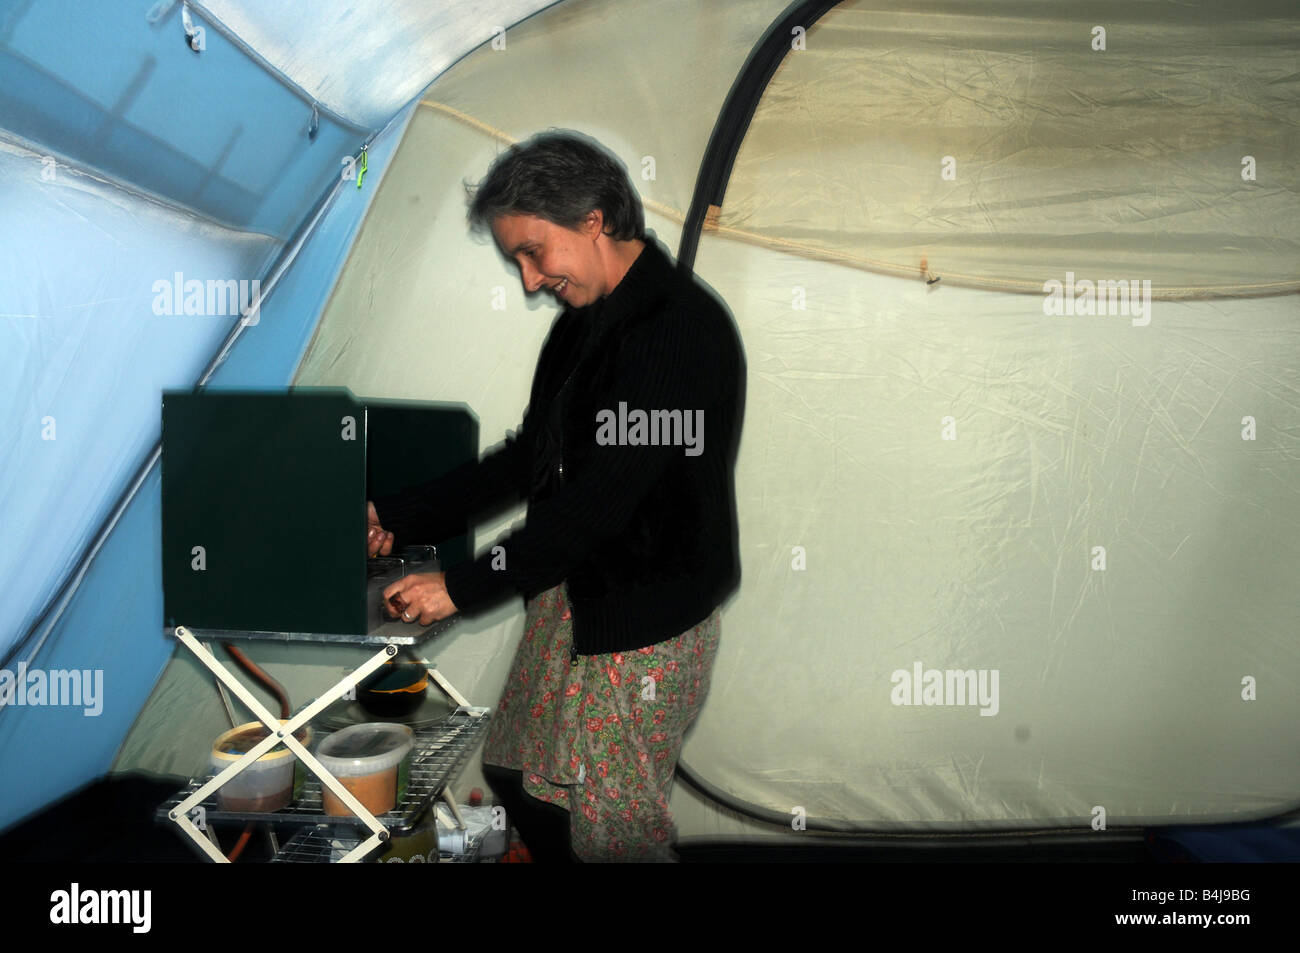 A woman cooking in her tent during a storm Stock Photo